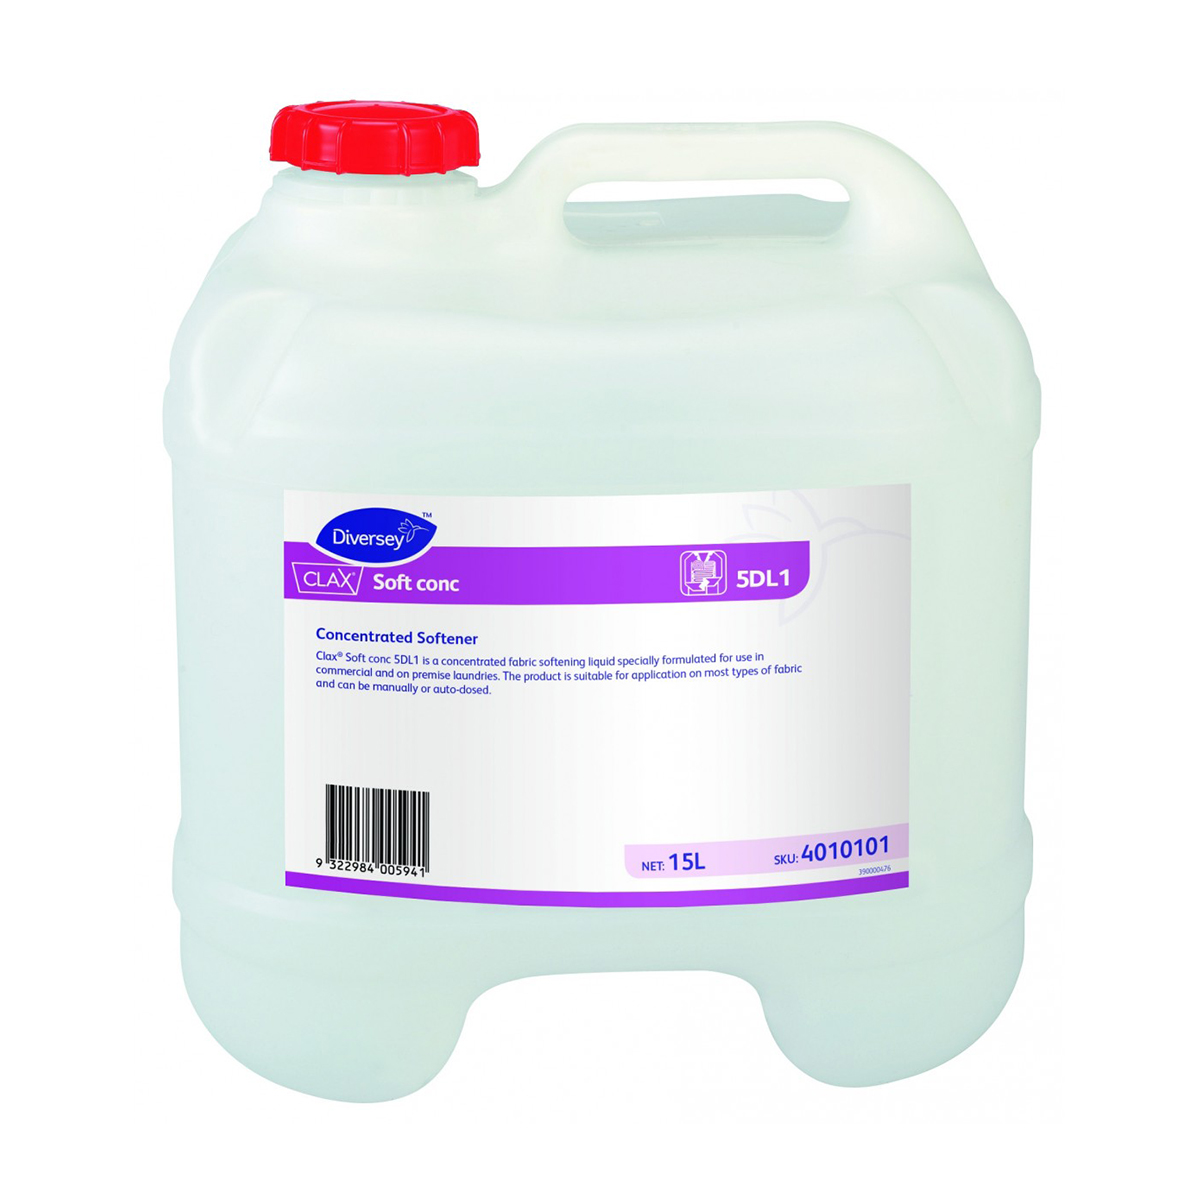 cleaning-products-laundr-clax-soft-concentrated-fabric-softening-liquid-5DL1-15L-litre-commercial-and-on-premise-laundries-manual-or-auto-dosed-pleasant-residual-smell-vjs-distributors-4010101